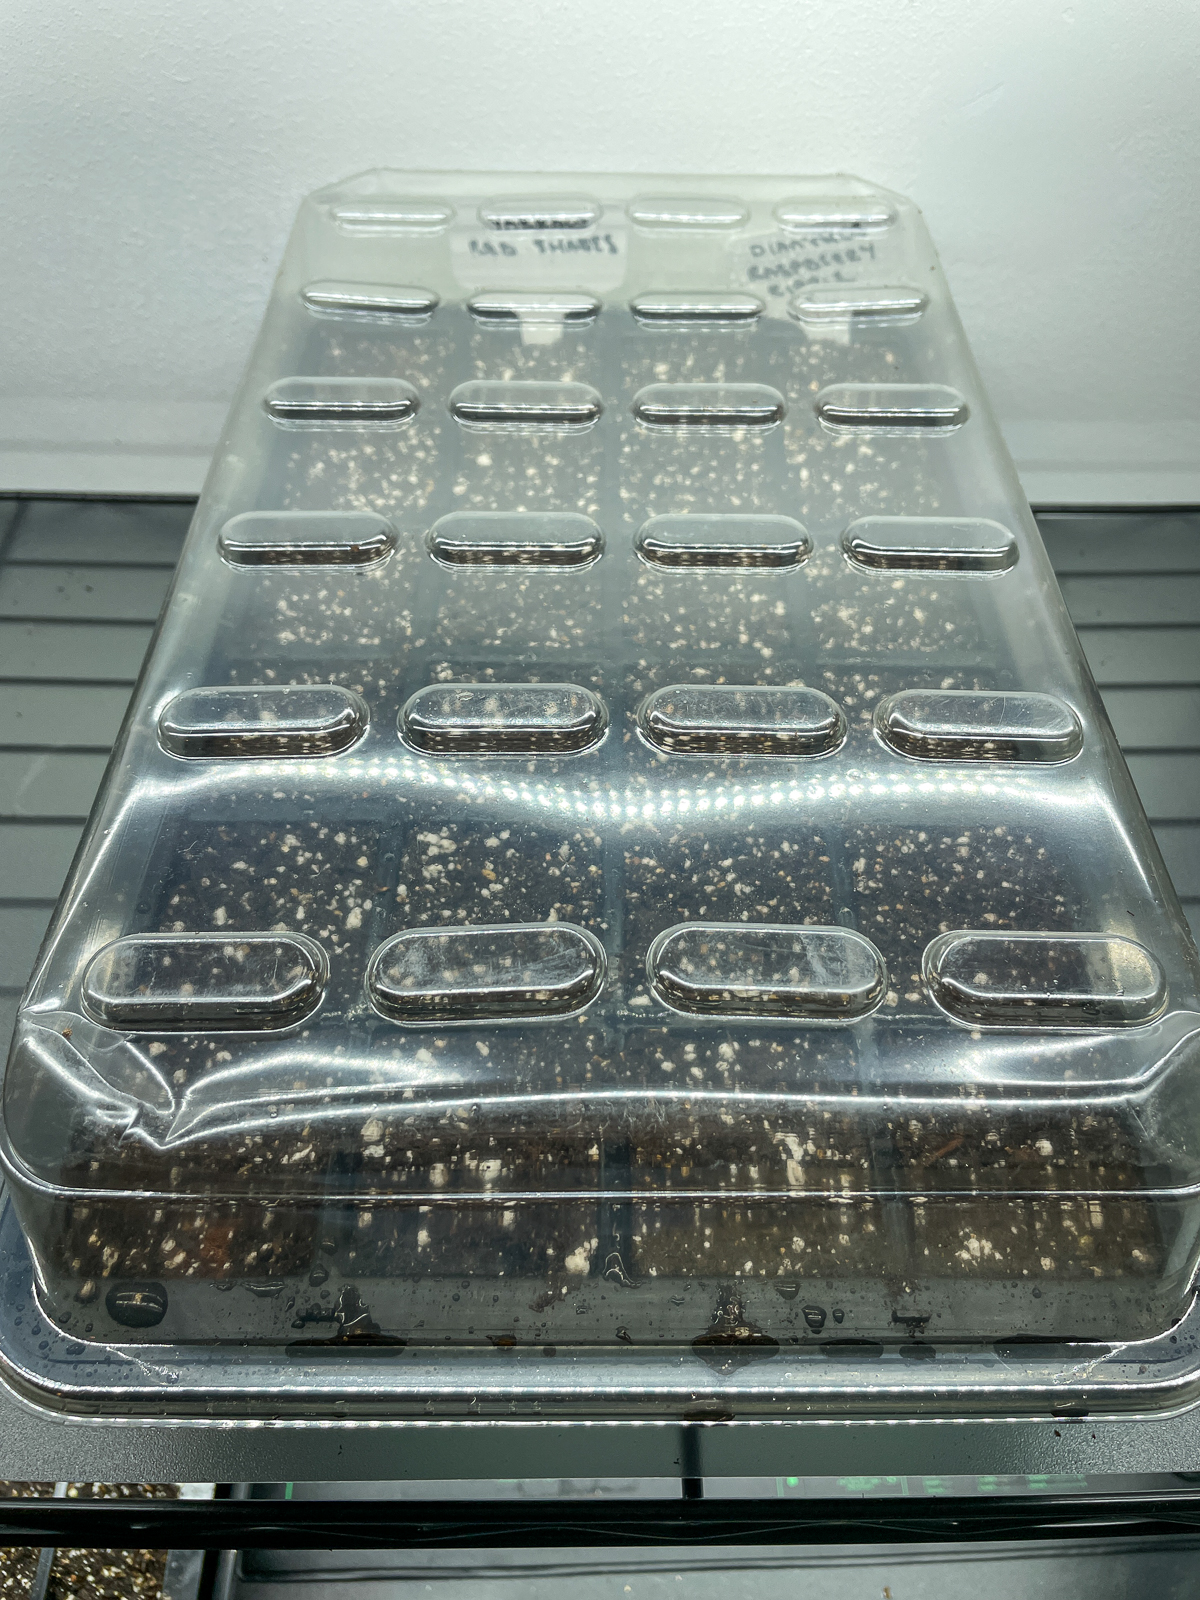 yarrow seeds in seed tray with humidity dome over it